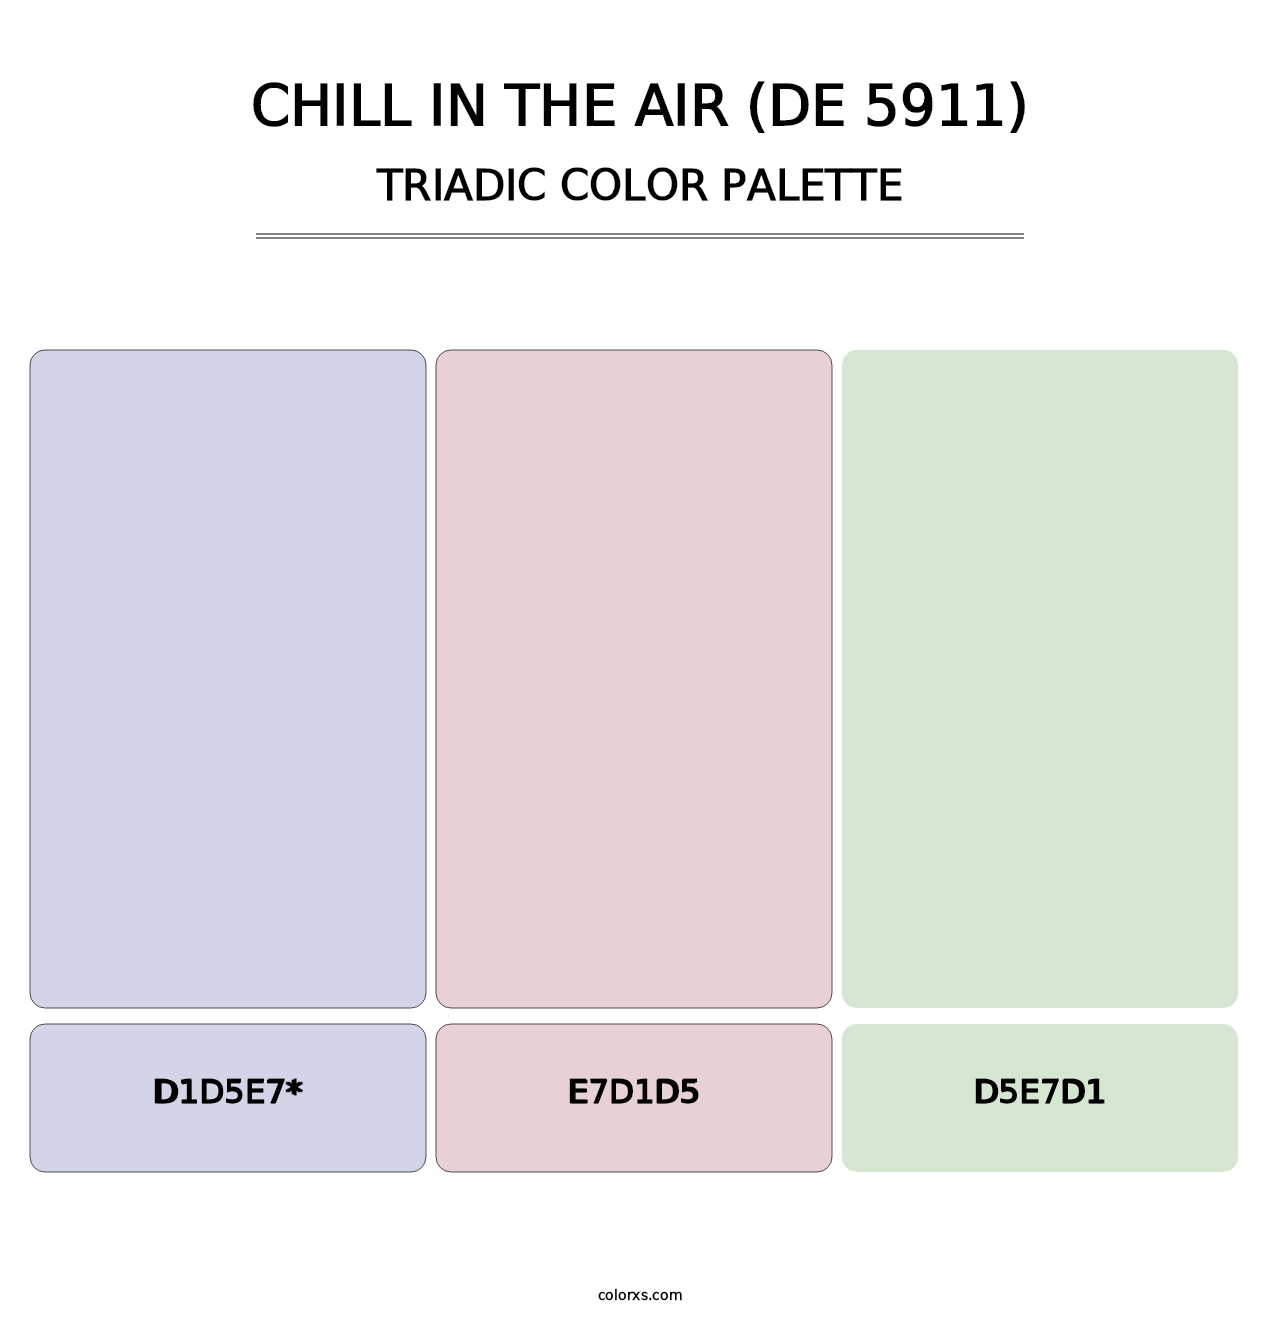 Chill in the Air (DE 5911) - Triadic Color Palette